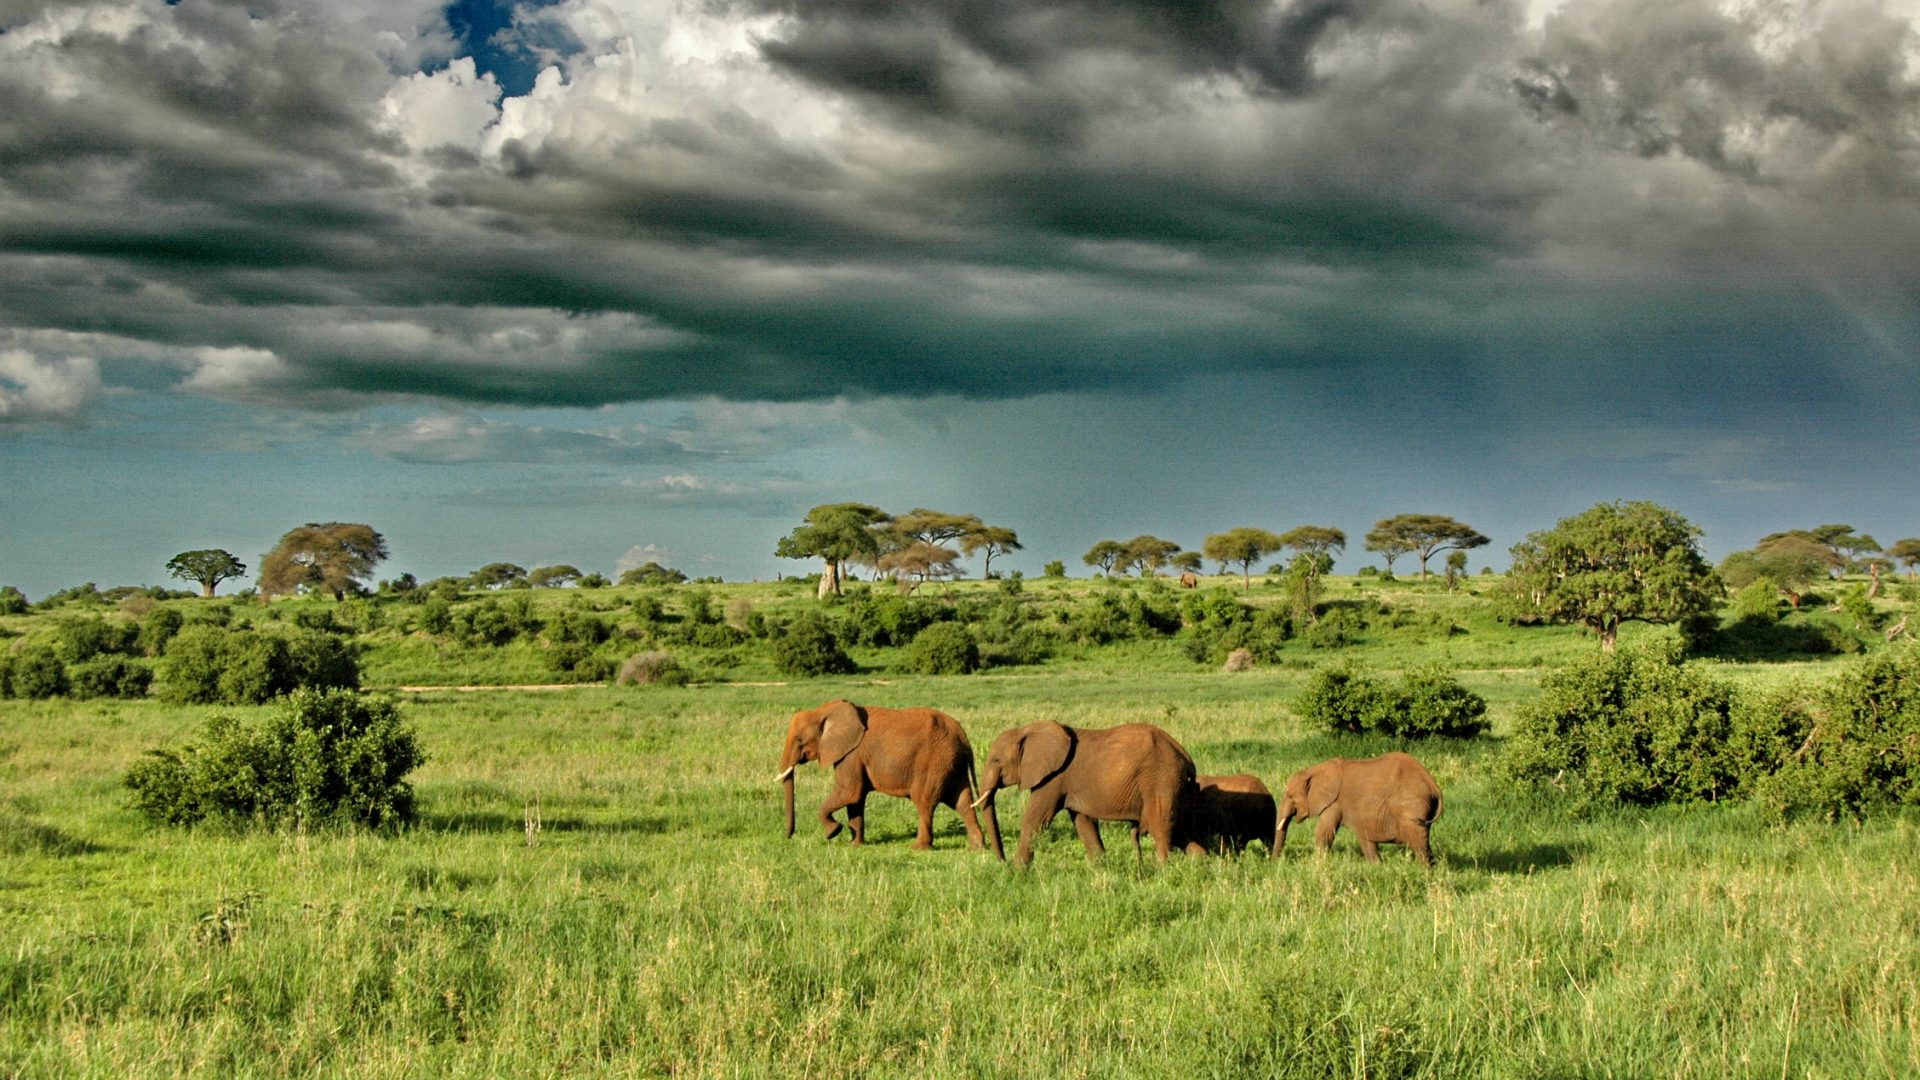 Olivers-Camp-Elephants-under-dramatic-clouds-1920x1080